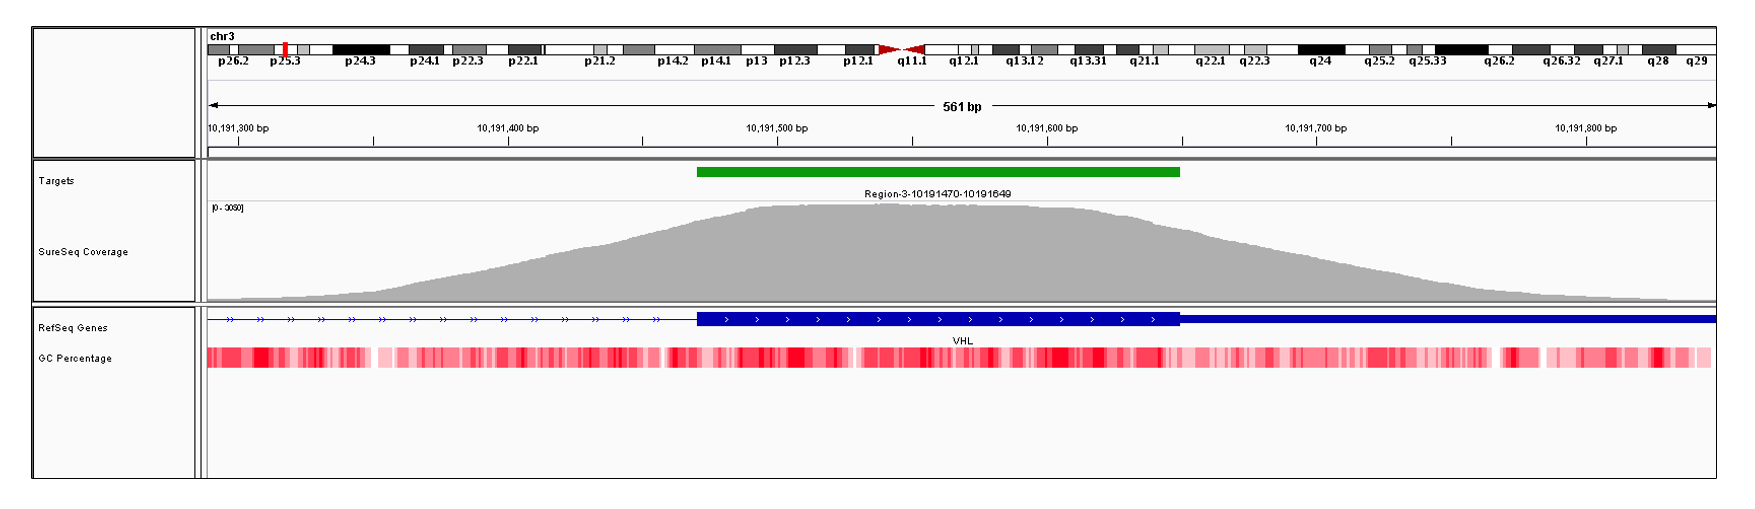 VHL Exon 3 (hg19 chr3:10191471-10195354). Depth of coverage per base (grey). Targeted region (green). Gene coding region as defined by RefSeq (blue). GC percentage (red). Image